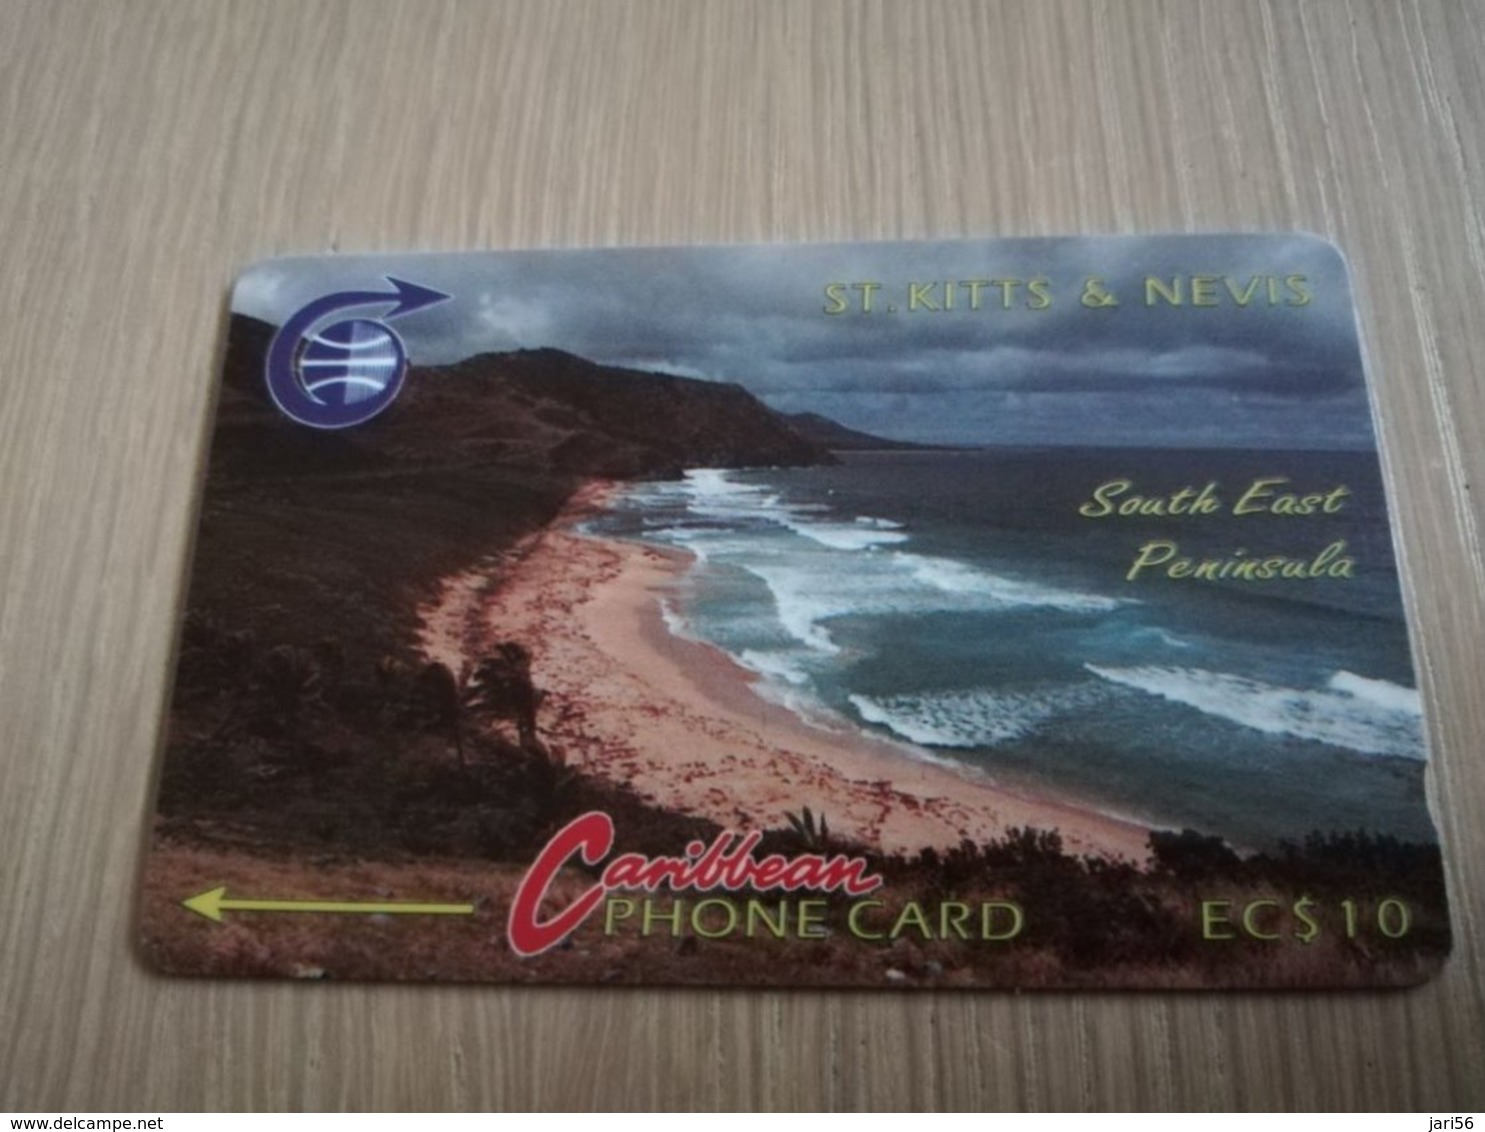 ST KITTS & NEVIS   GPT CARD $10,-   3CSKB     NO STK-3B    SOUTH EAST PENINSULA     Fine Used Card  **2328** - St. Kitts & Nevis